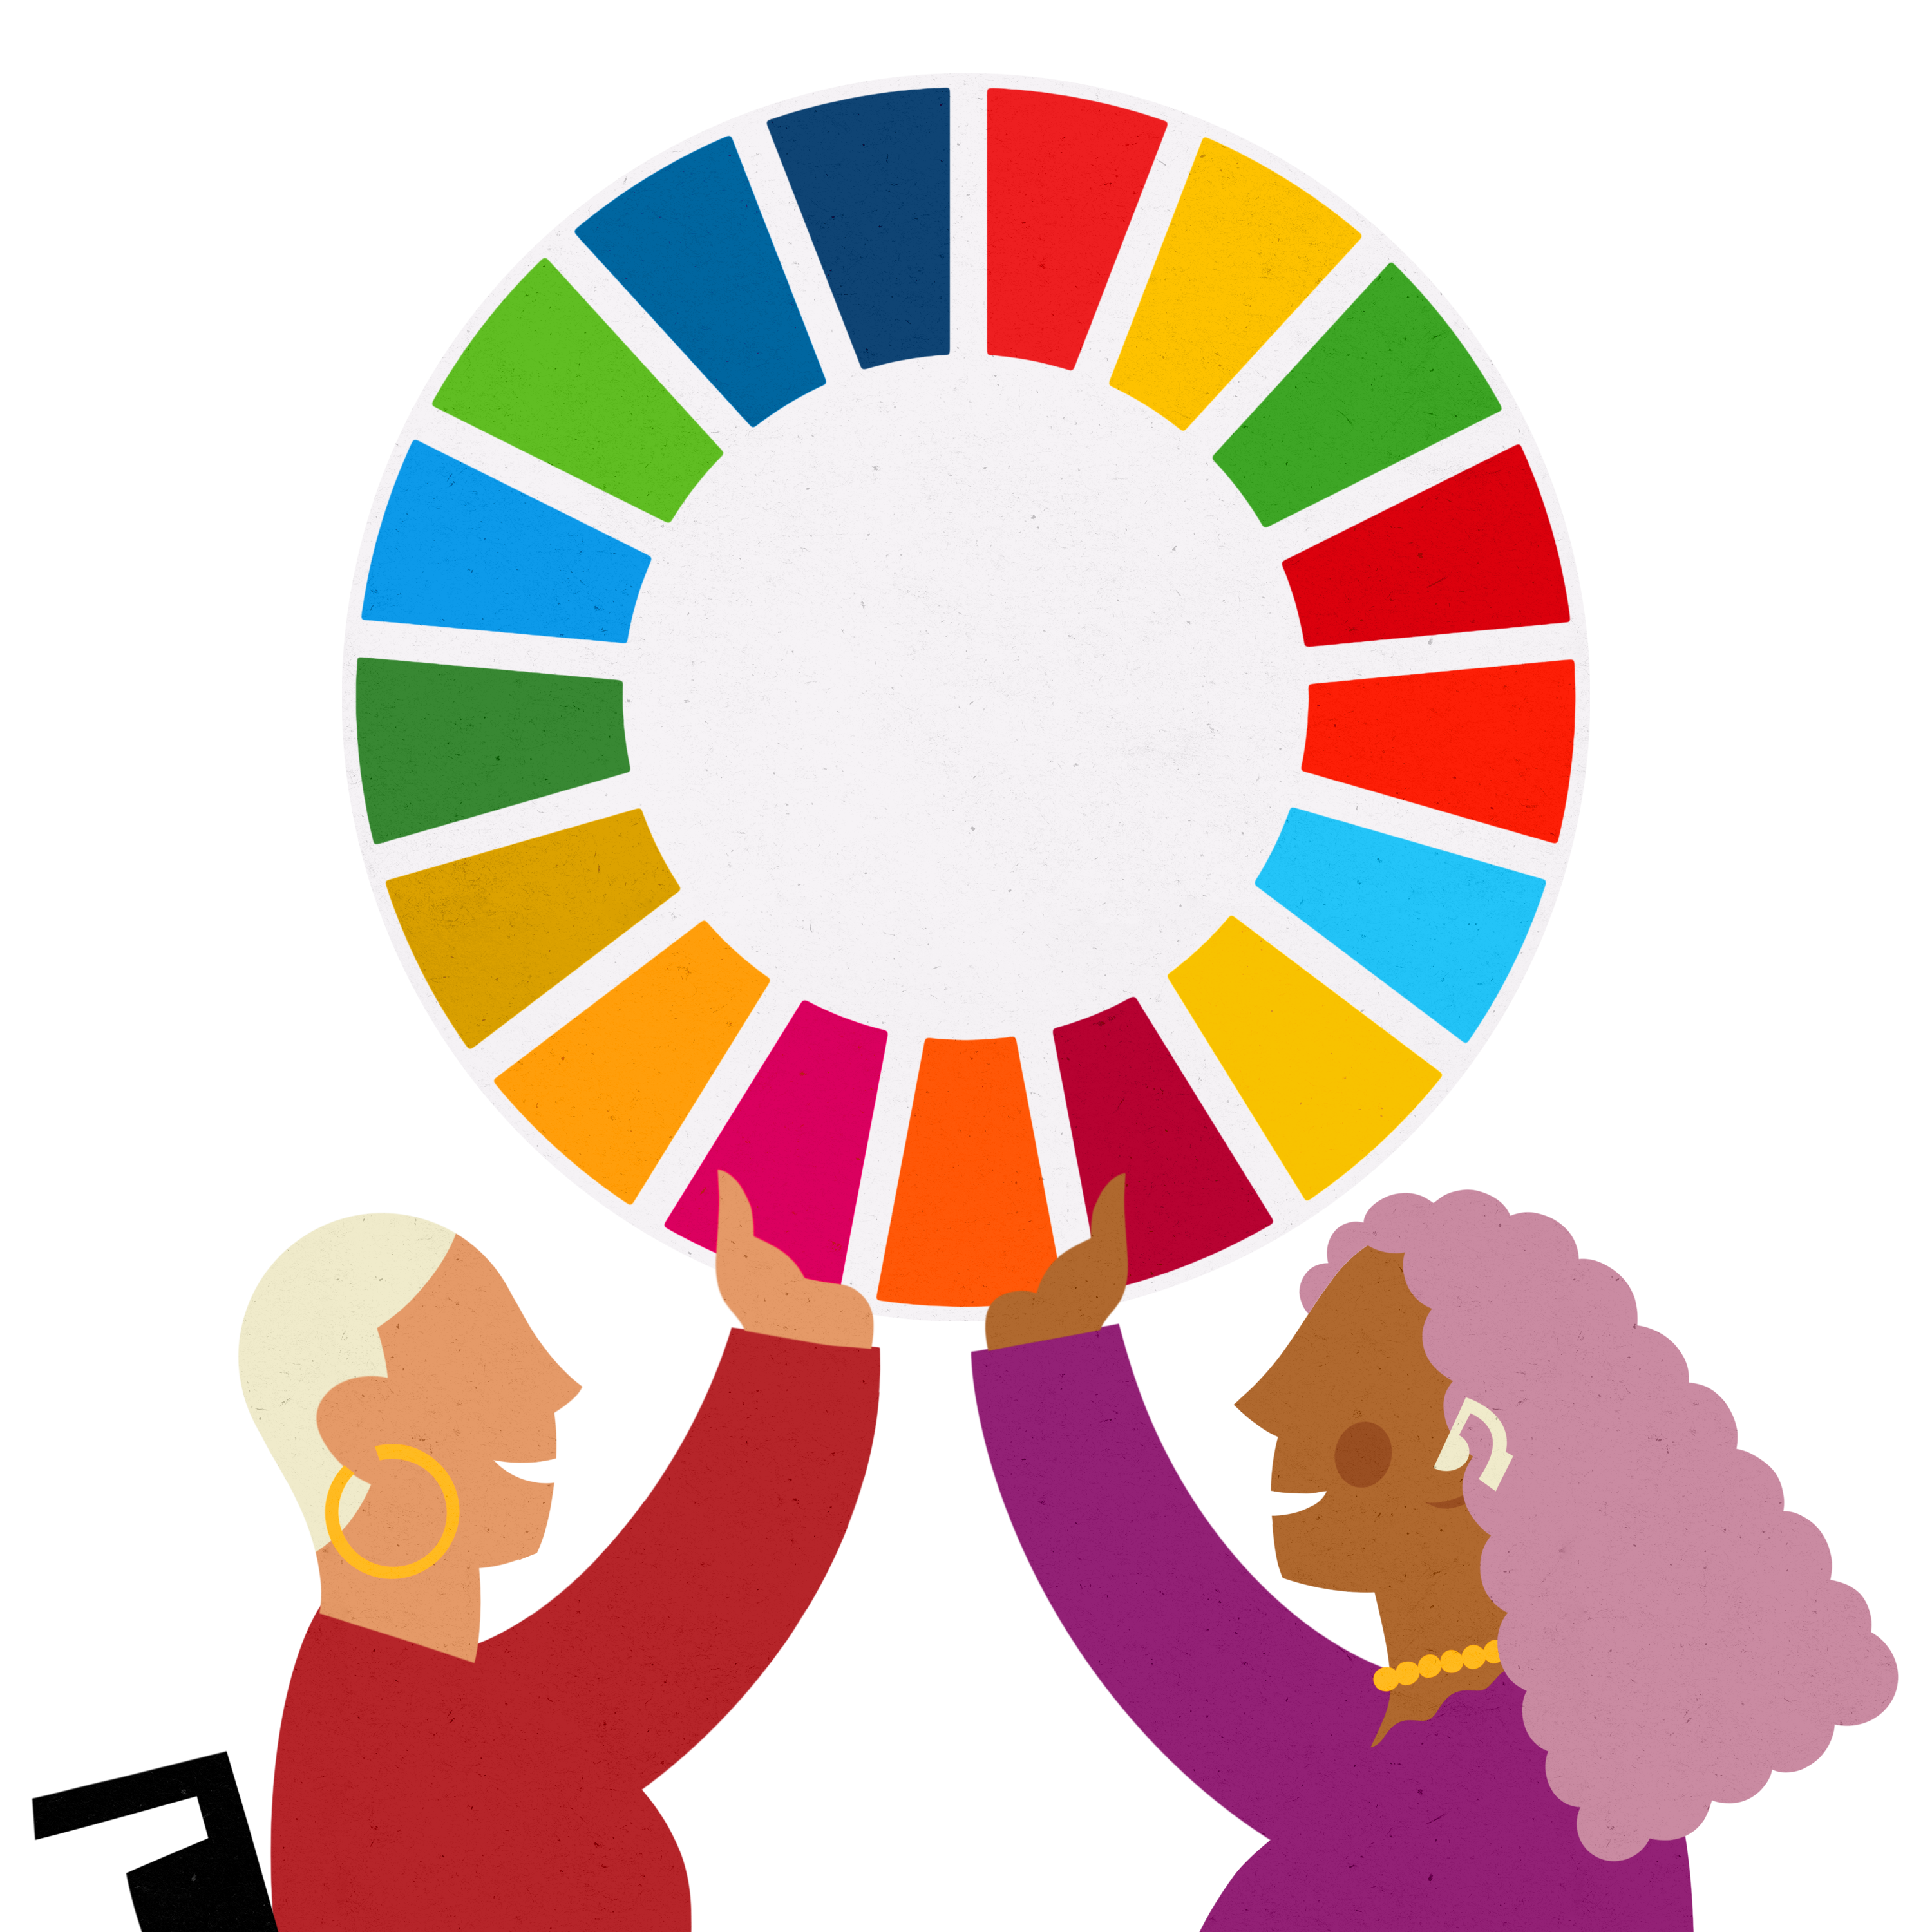 Two young women with disabilities holding up the SDG Logo